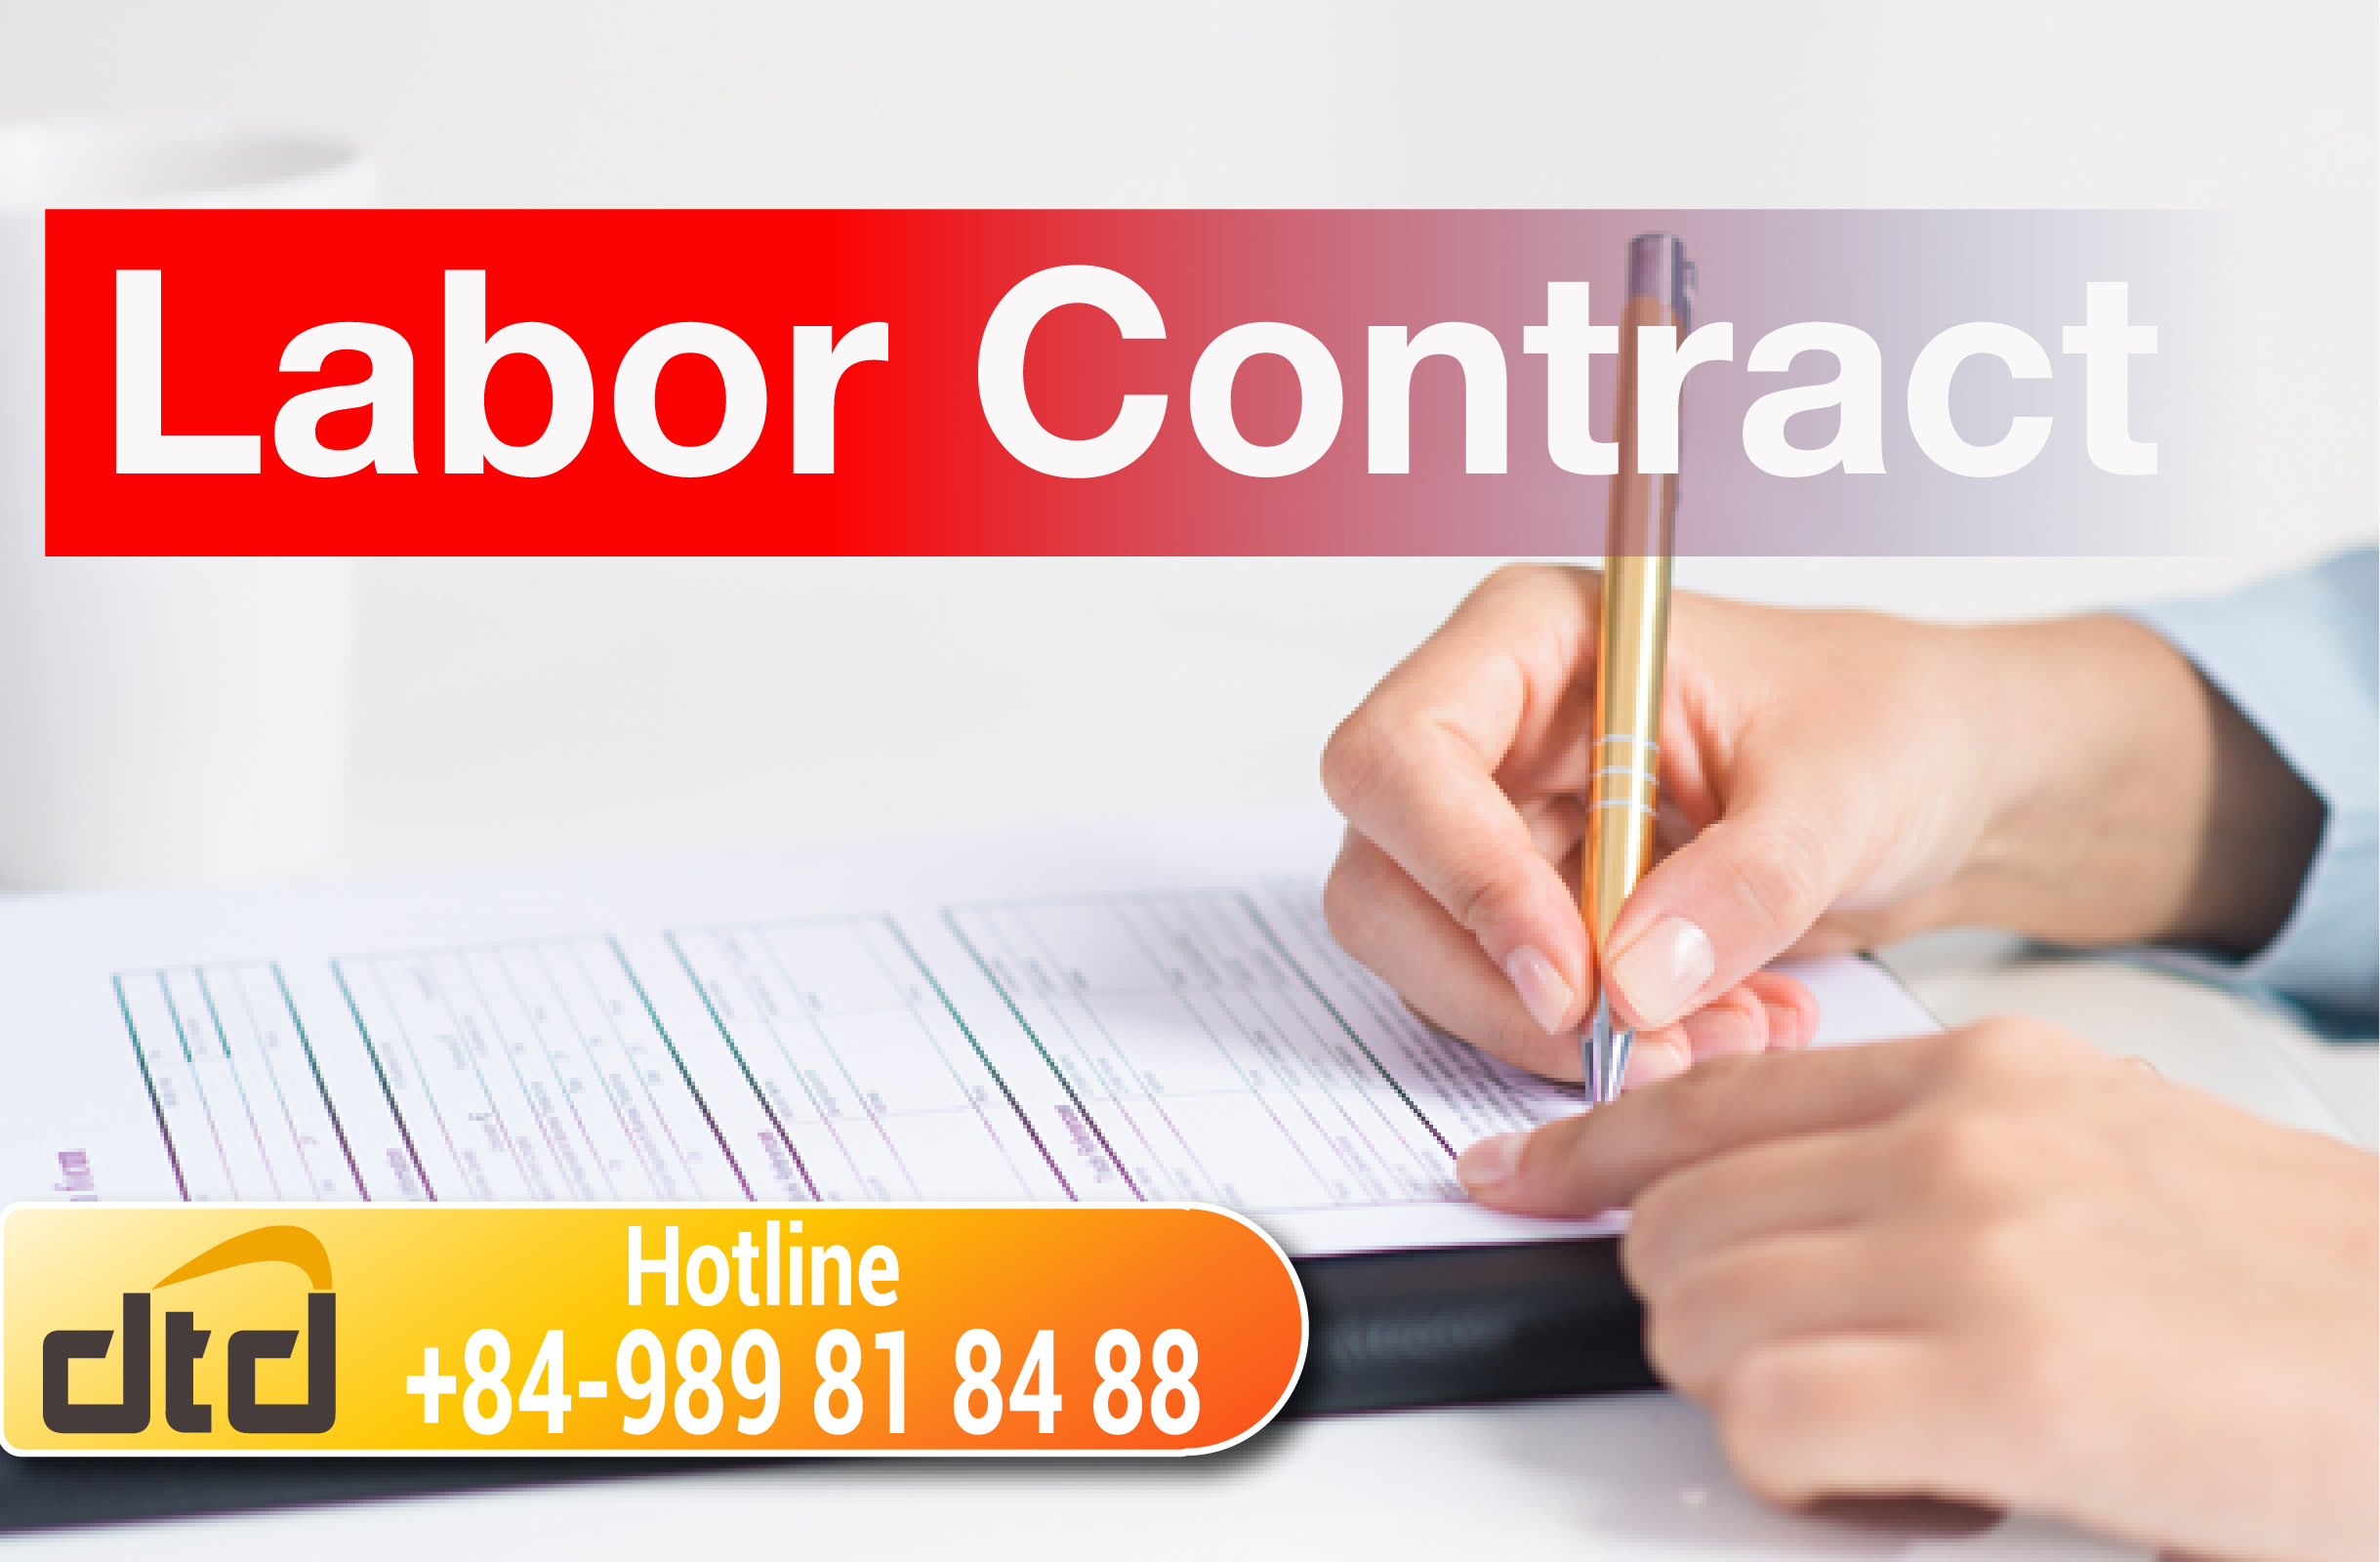 Which conditions should be met for a labor contract to be valid?